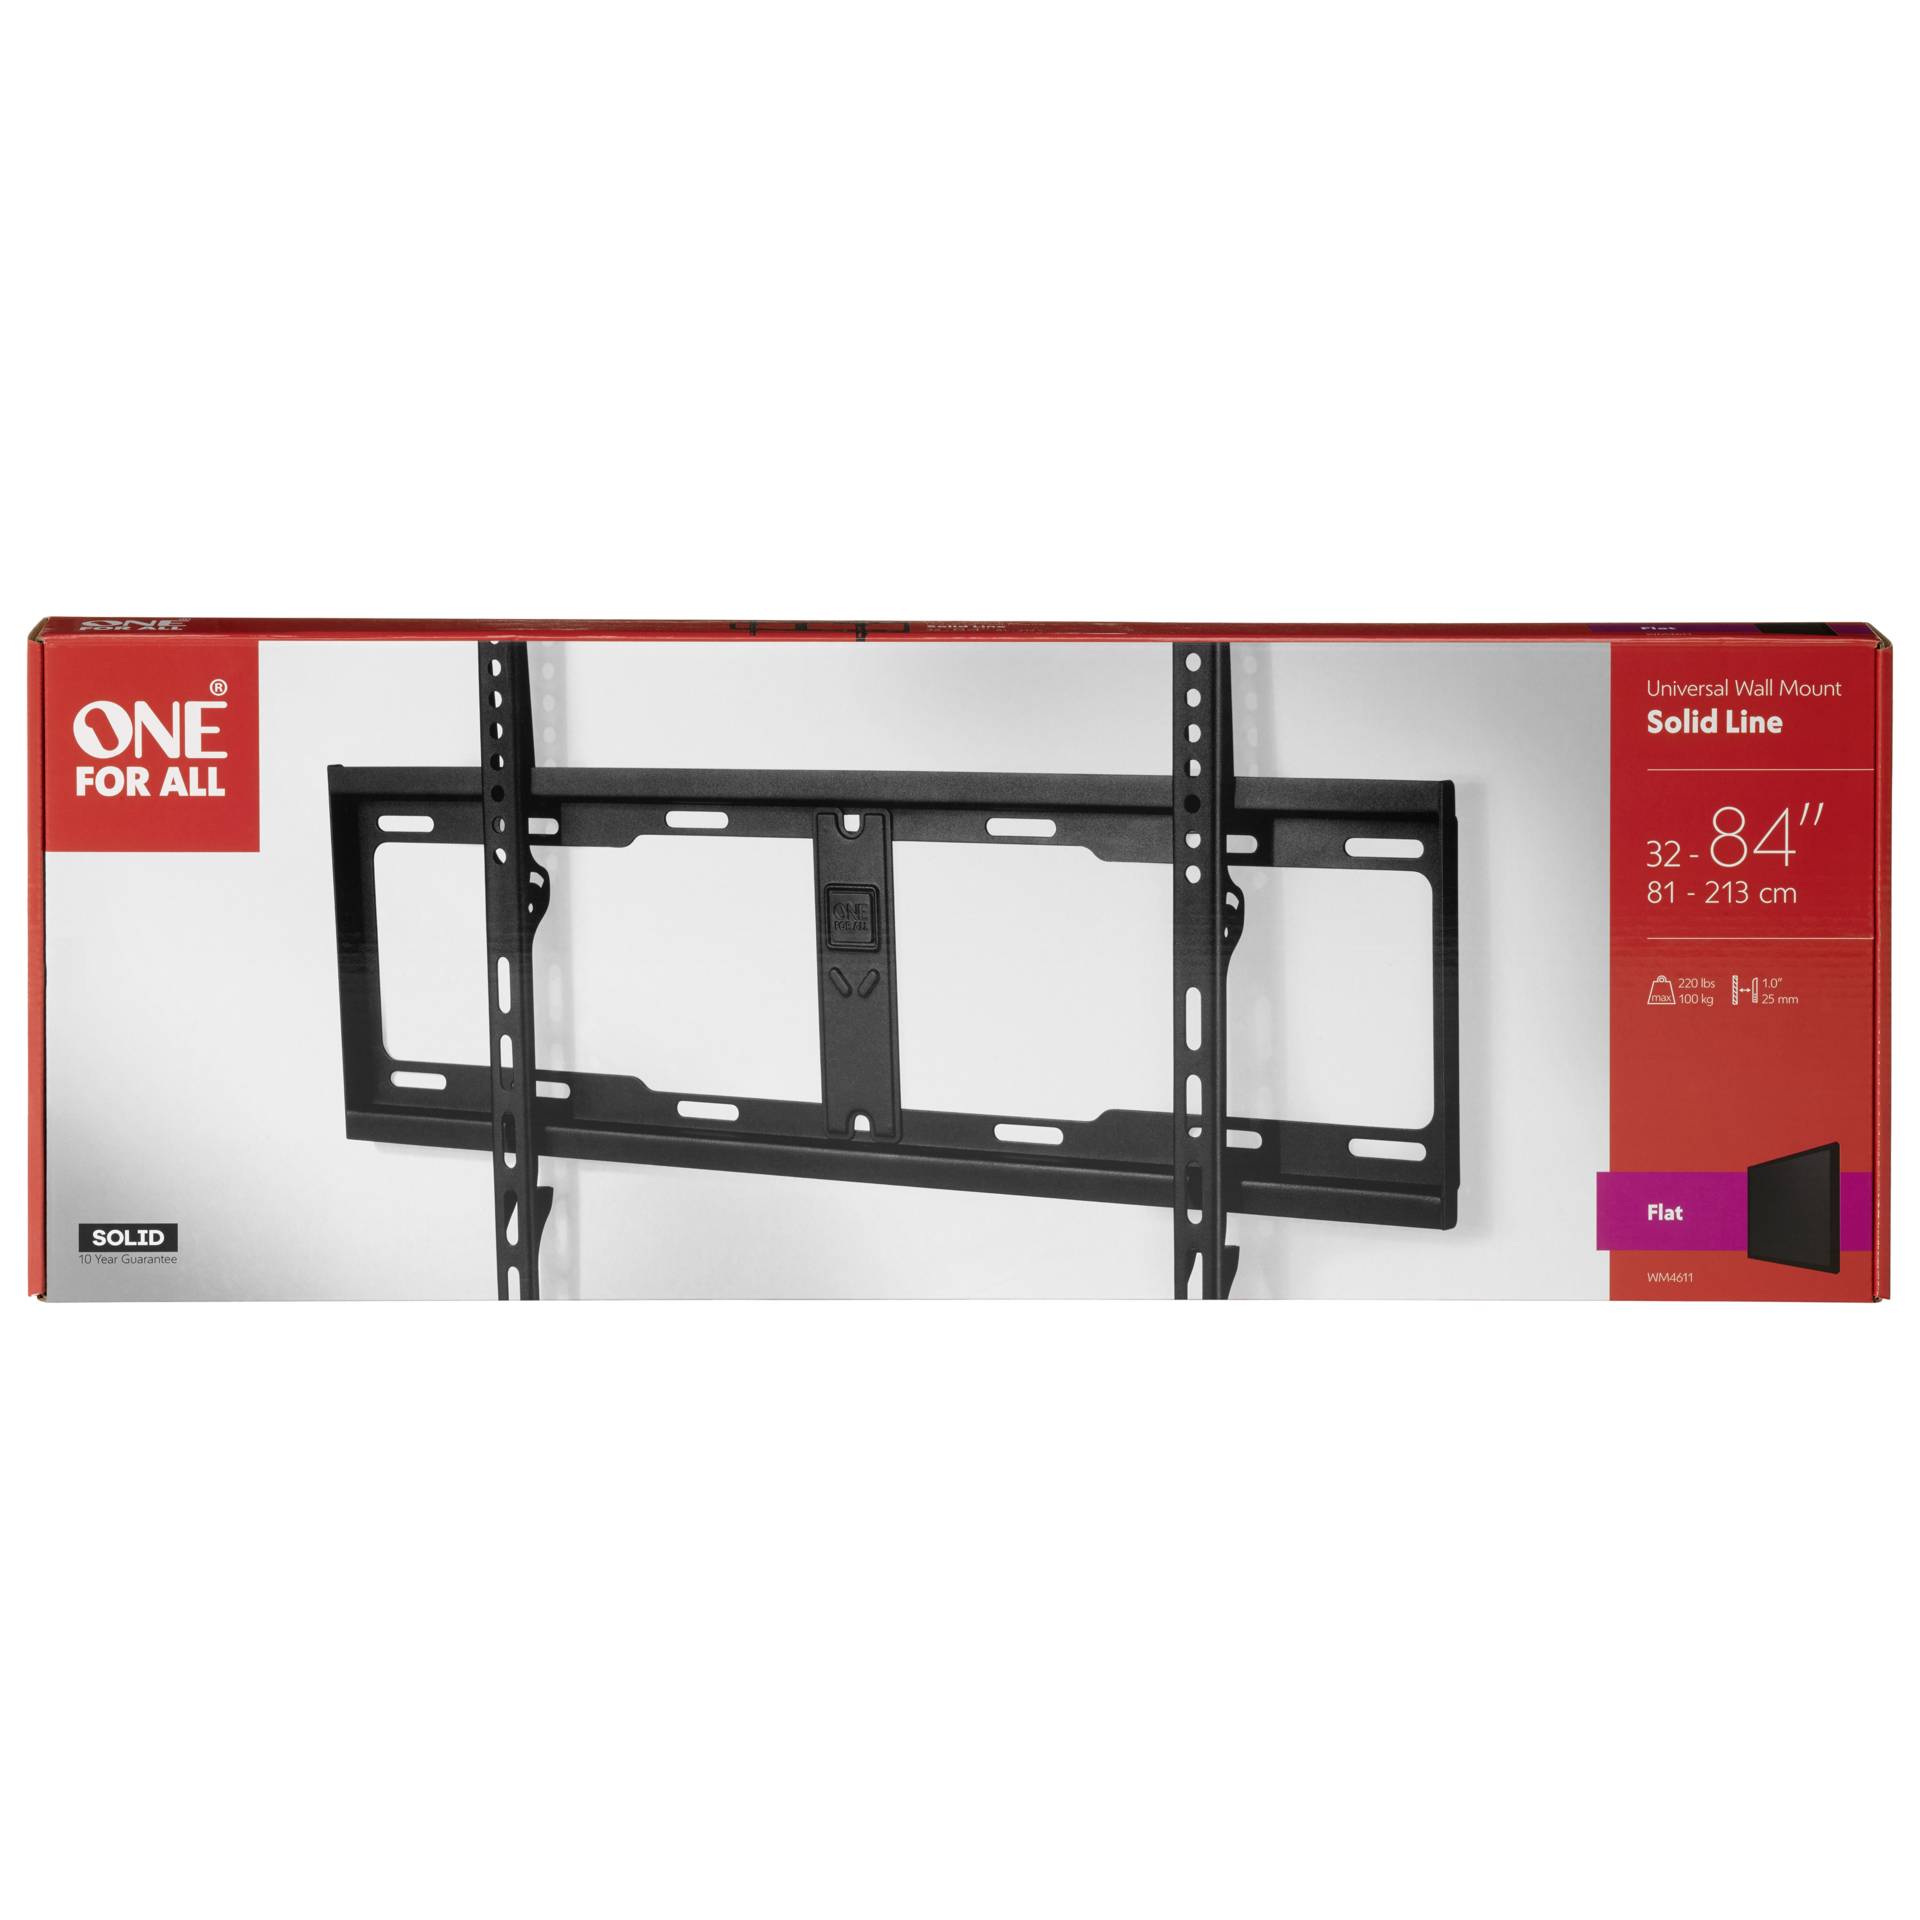 One for All TV supp. murale 84 Solid Flat